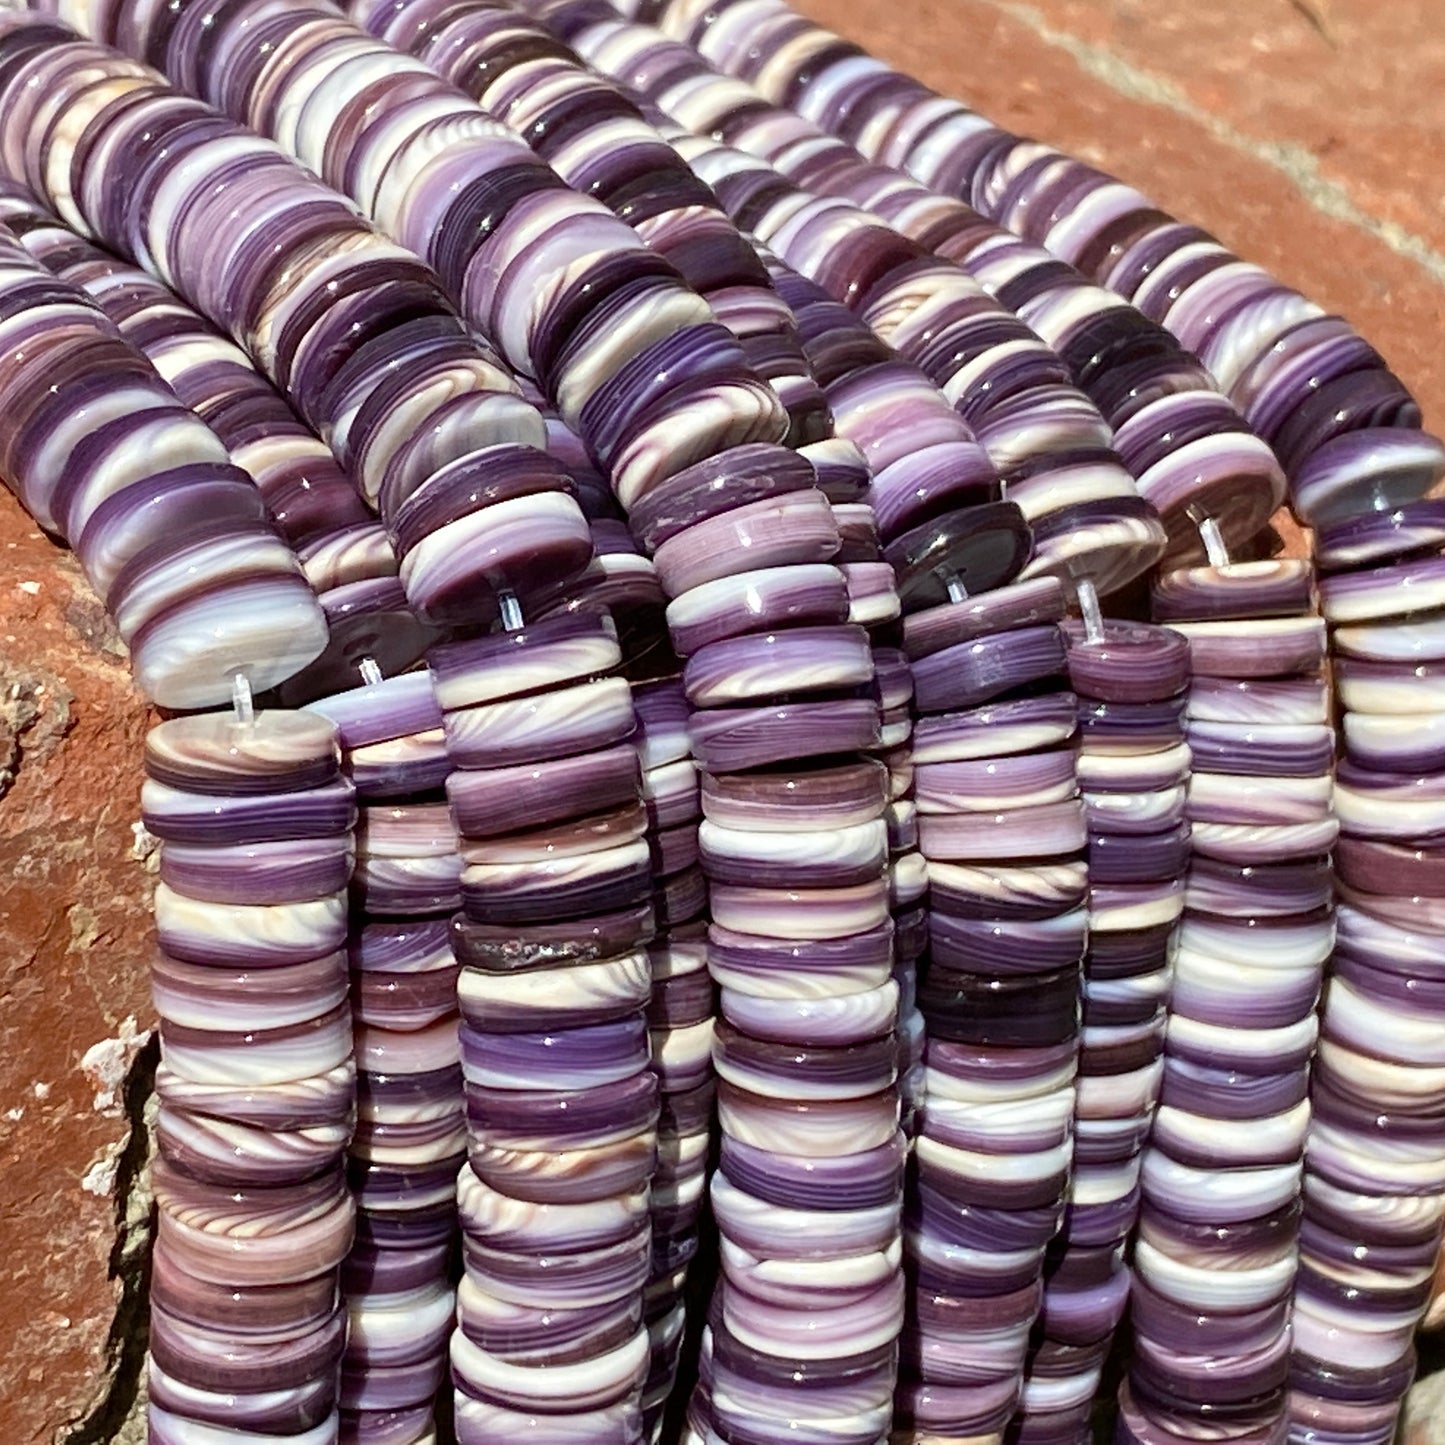 Lavender Wampum Shell Beads From New England/ Rhode Island (America's First Currency From Year 1637-1673) Smooth Heishi For DIY Jewelry Making